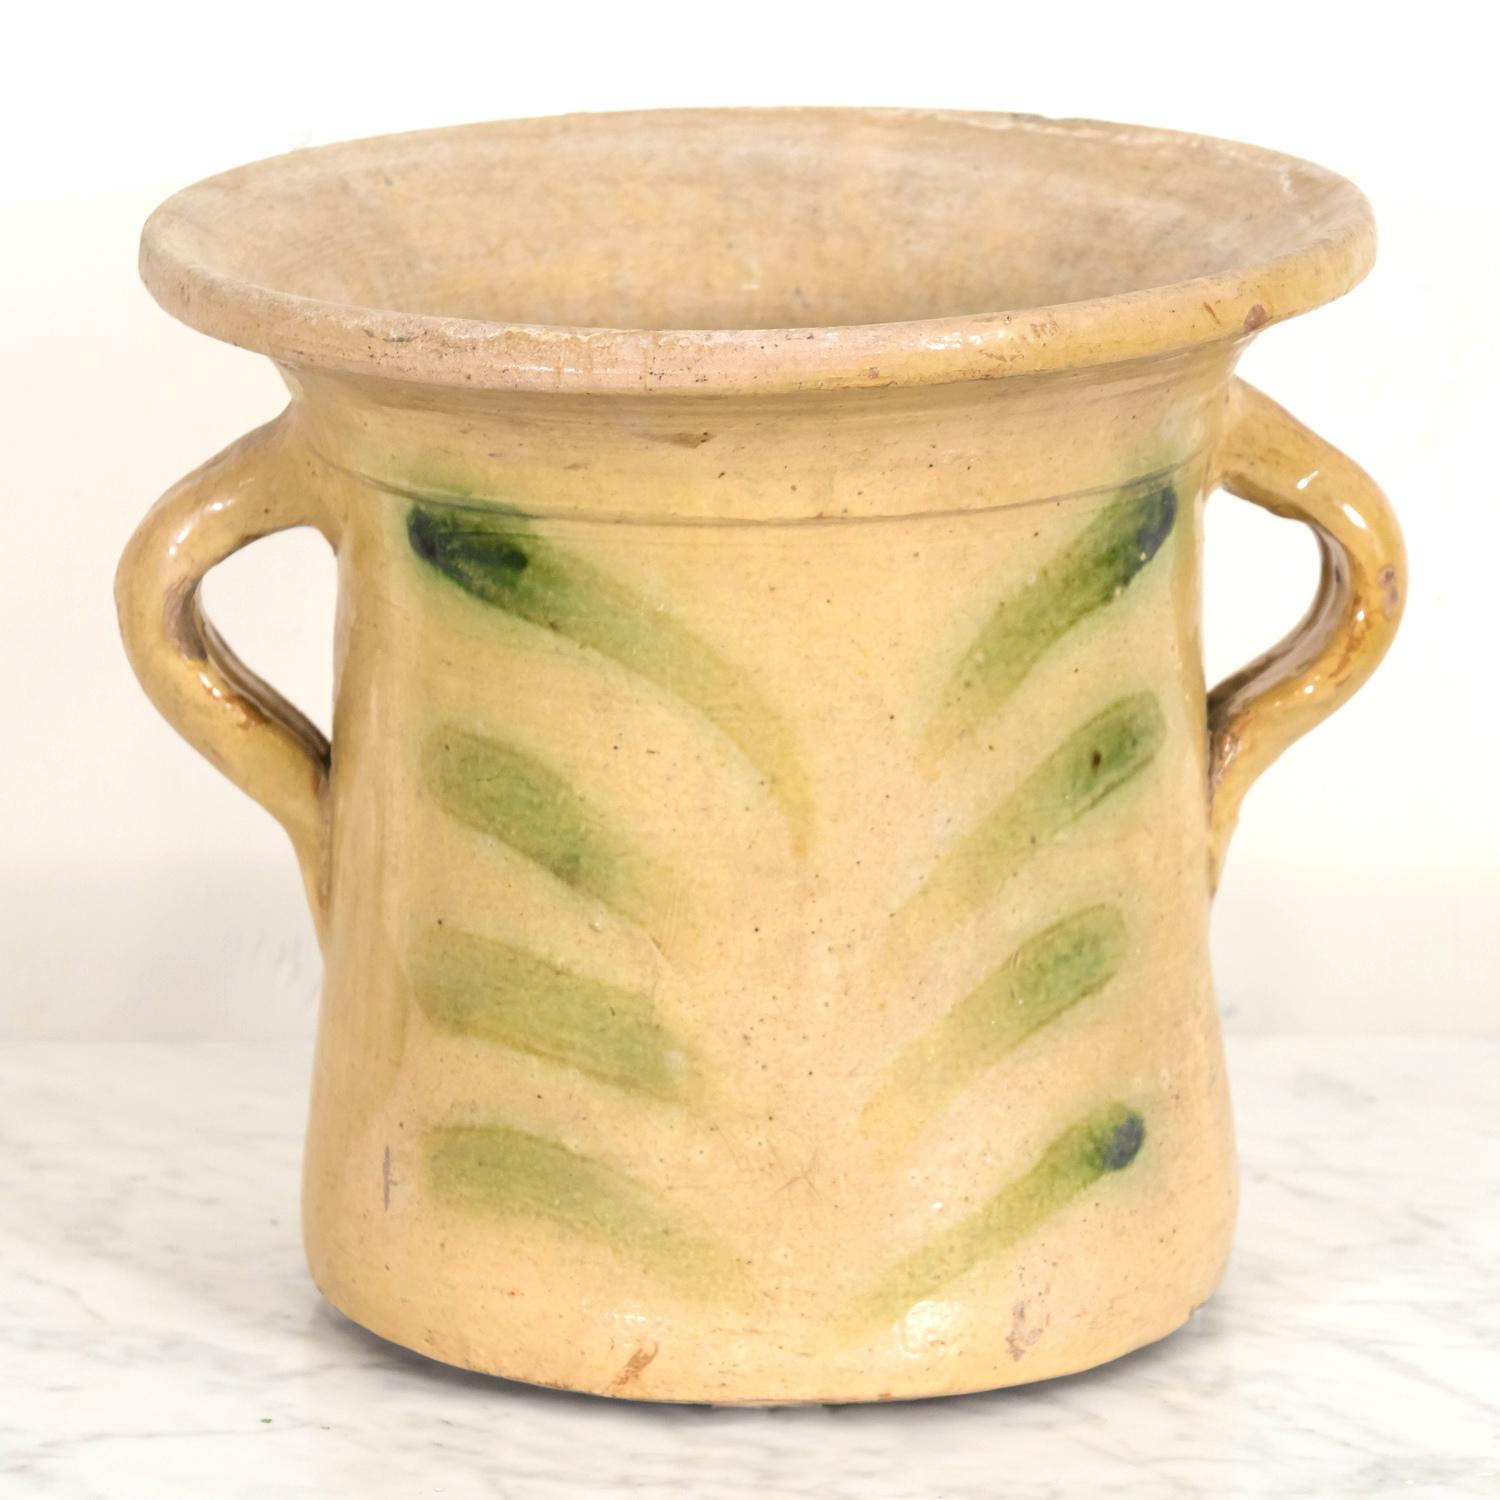 A rare and colorful early 19th century French pot d'aisance en terre vernisse or glazed terracotta chamber pot hand made in the South of France, circa early 1800s. Having a wide rim, tapered base and 